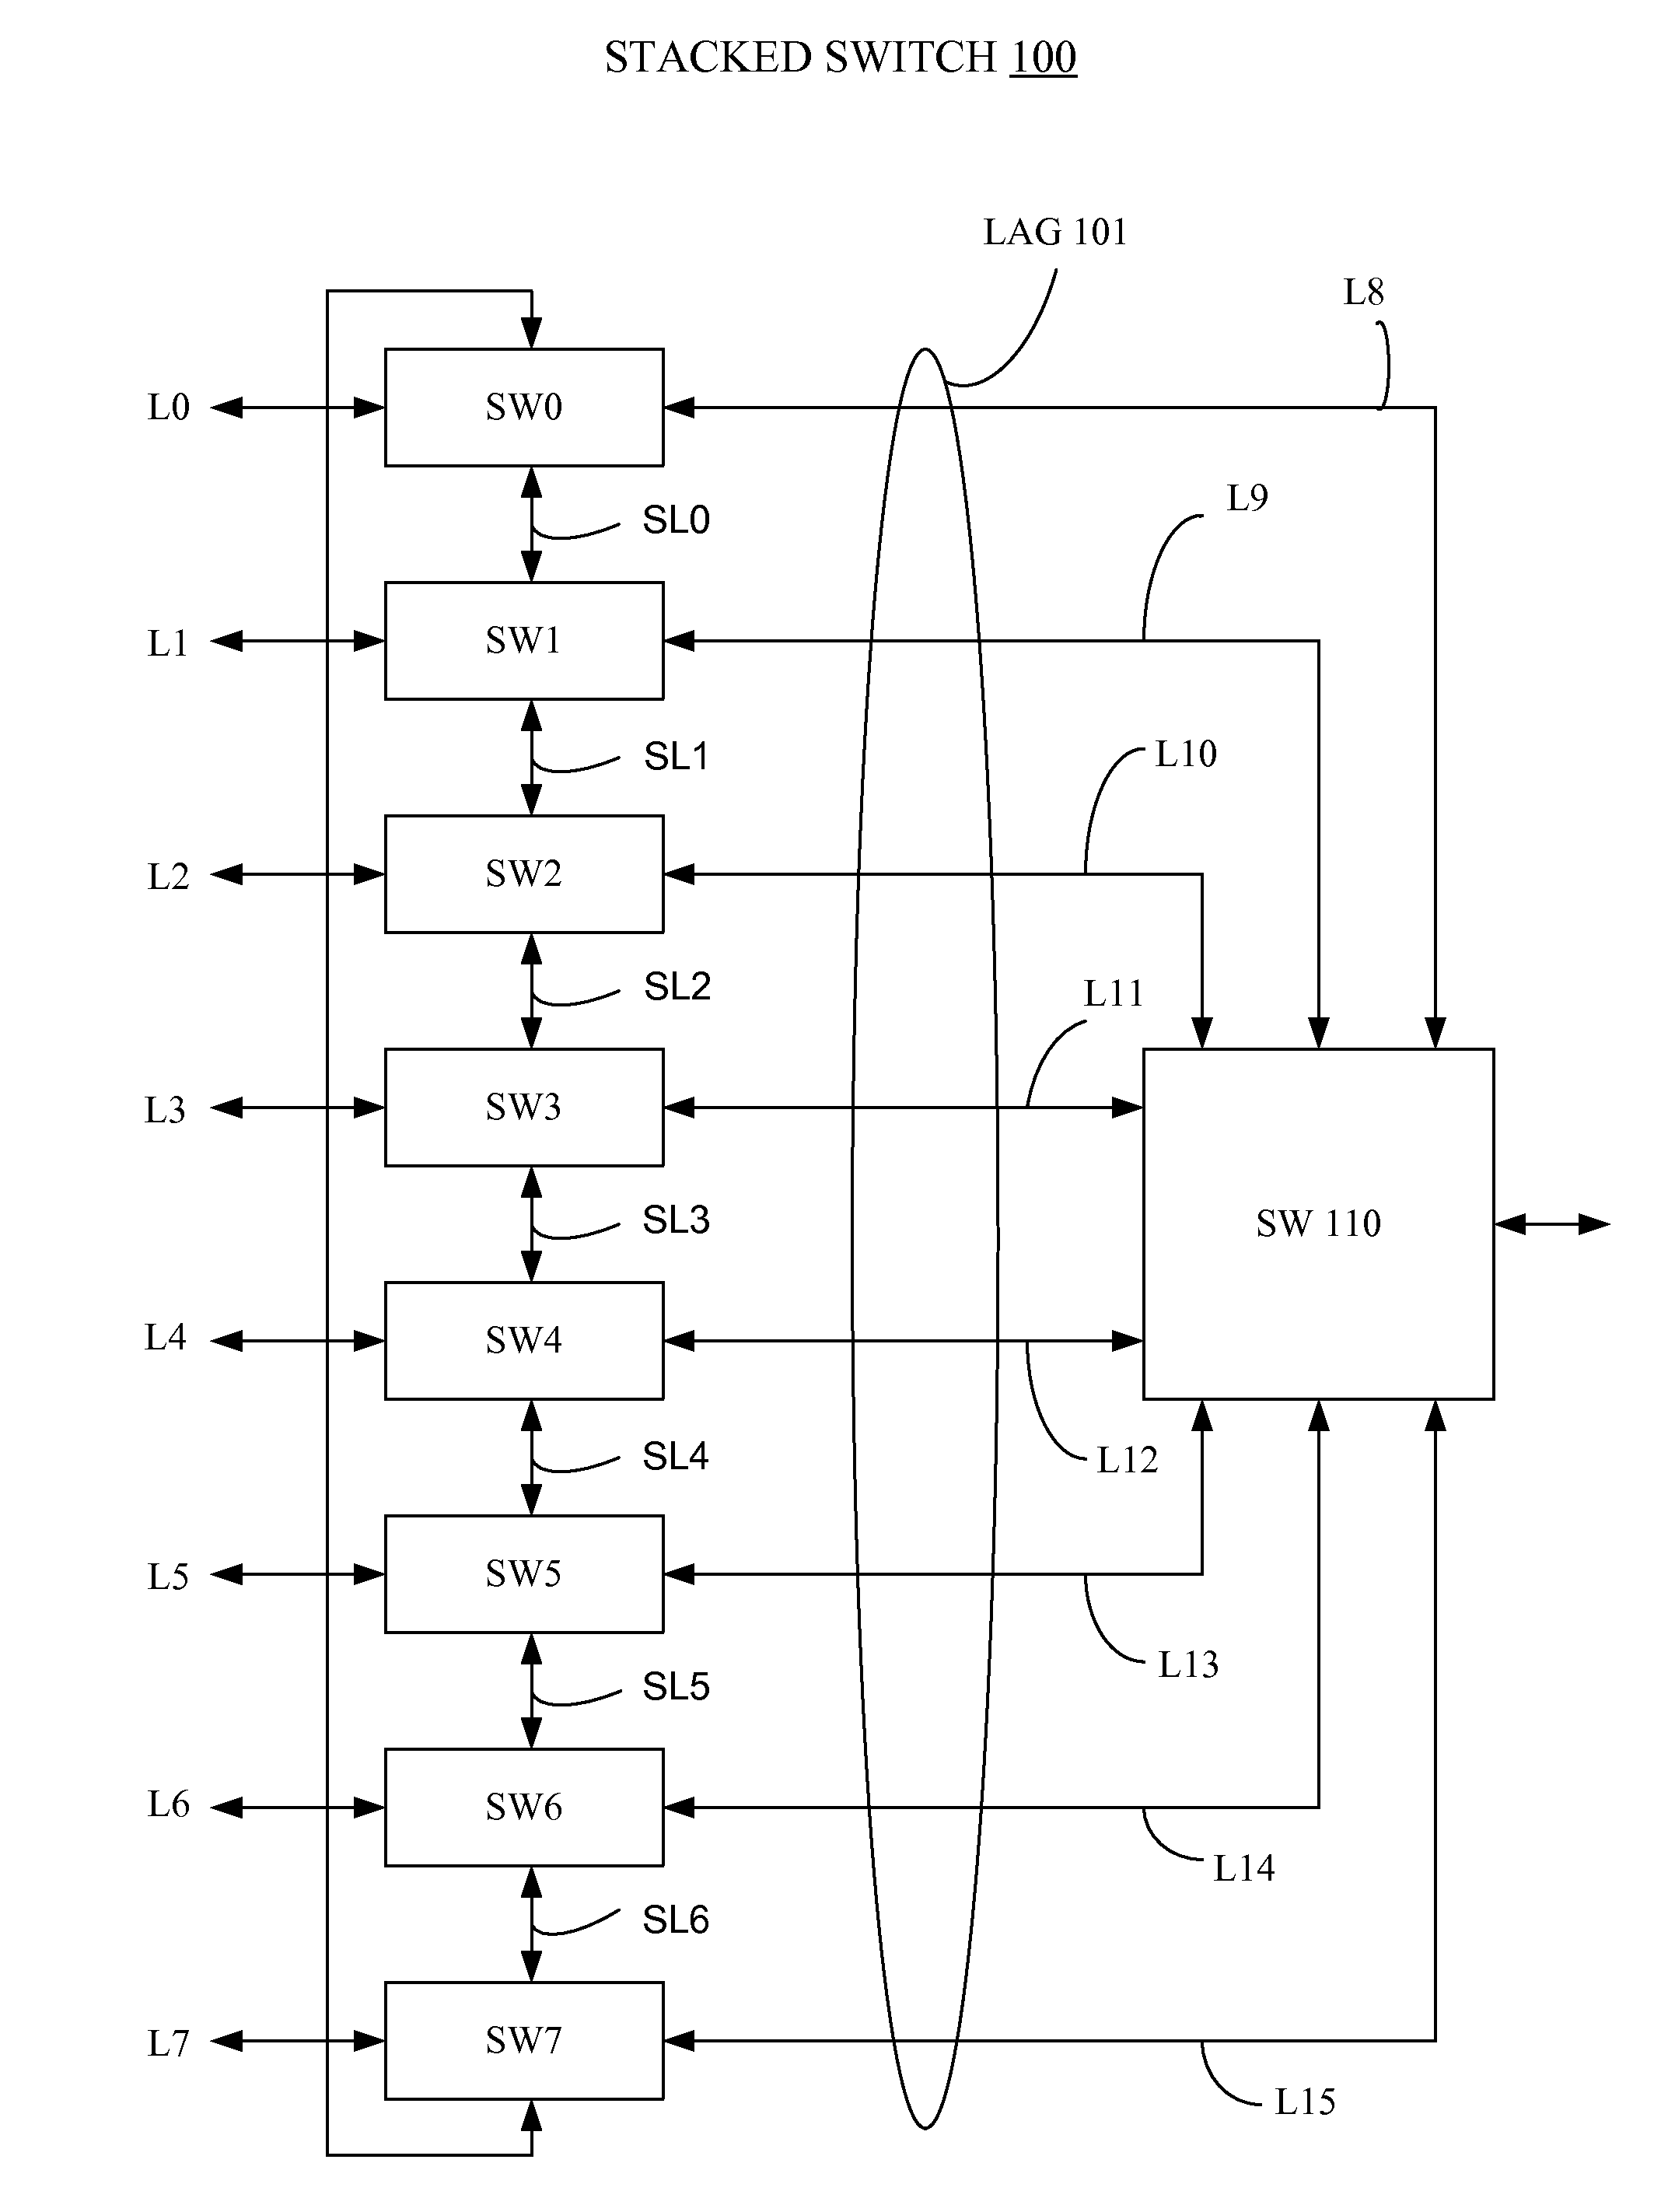 Method & apparatus for optimizing data traffic path through a stacked switch lag configuration